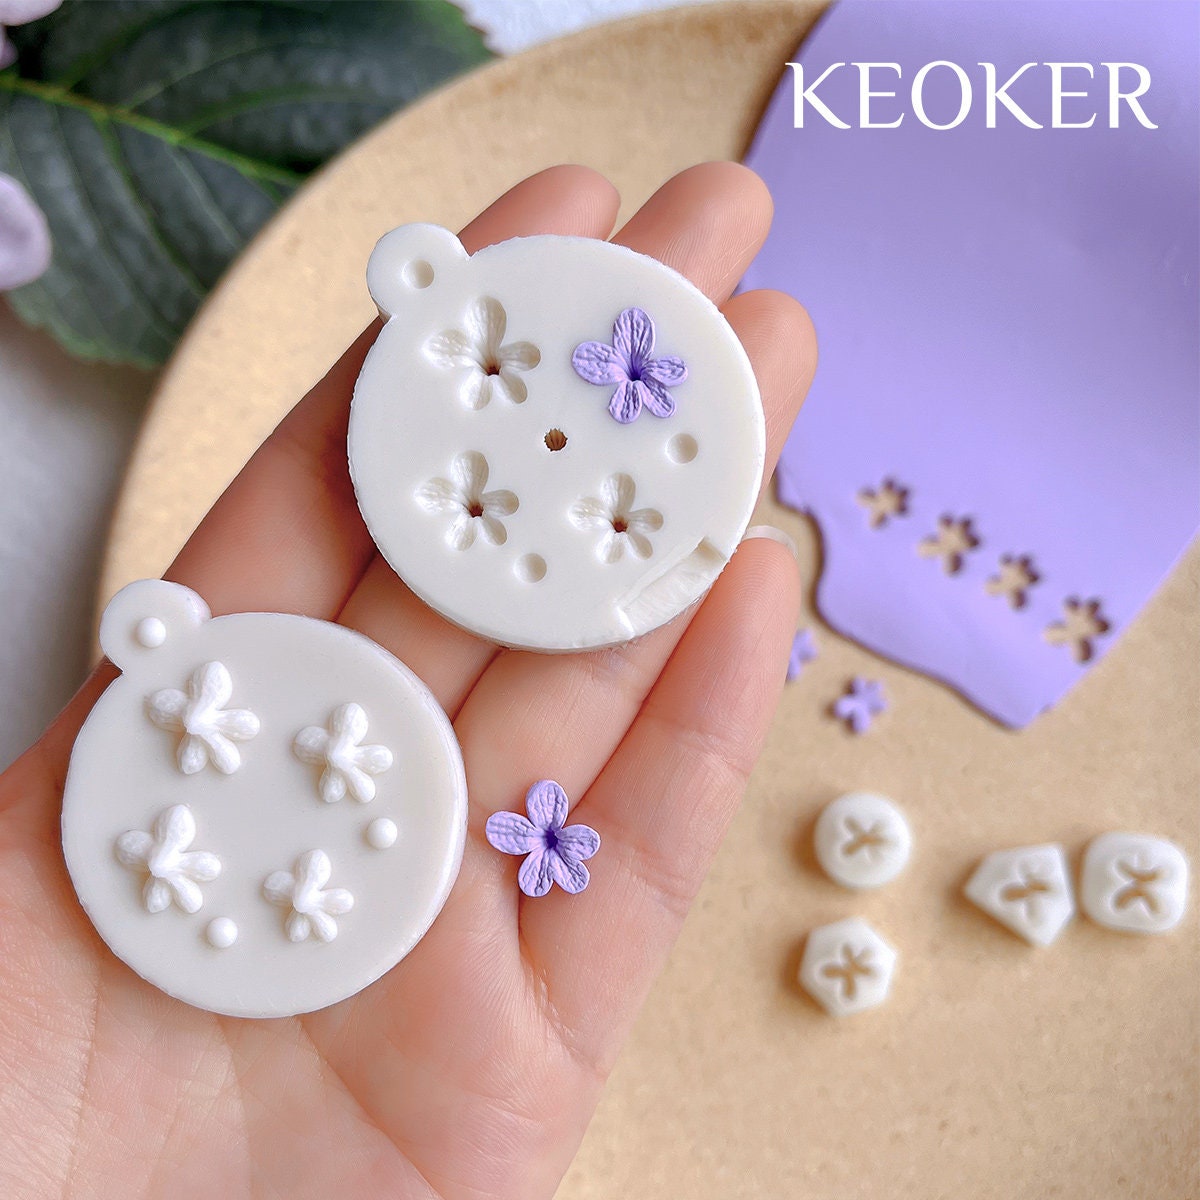  Keoker Fall Polymer Clay Cutters - Maple Leaf Clay Cutters for  Earrings Making, 9 Shapes Autumn Clay Earrings Cutters, Clay Cutters for  Polymer Clay Jewelry (Studs Clay Cutters)